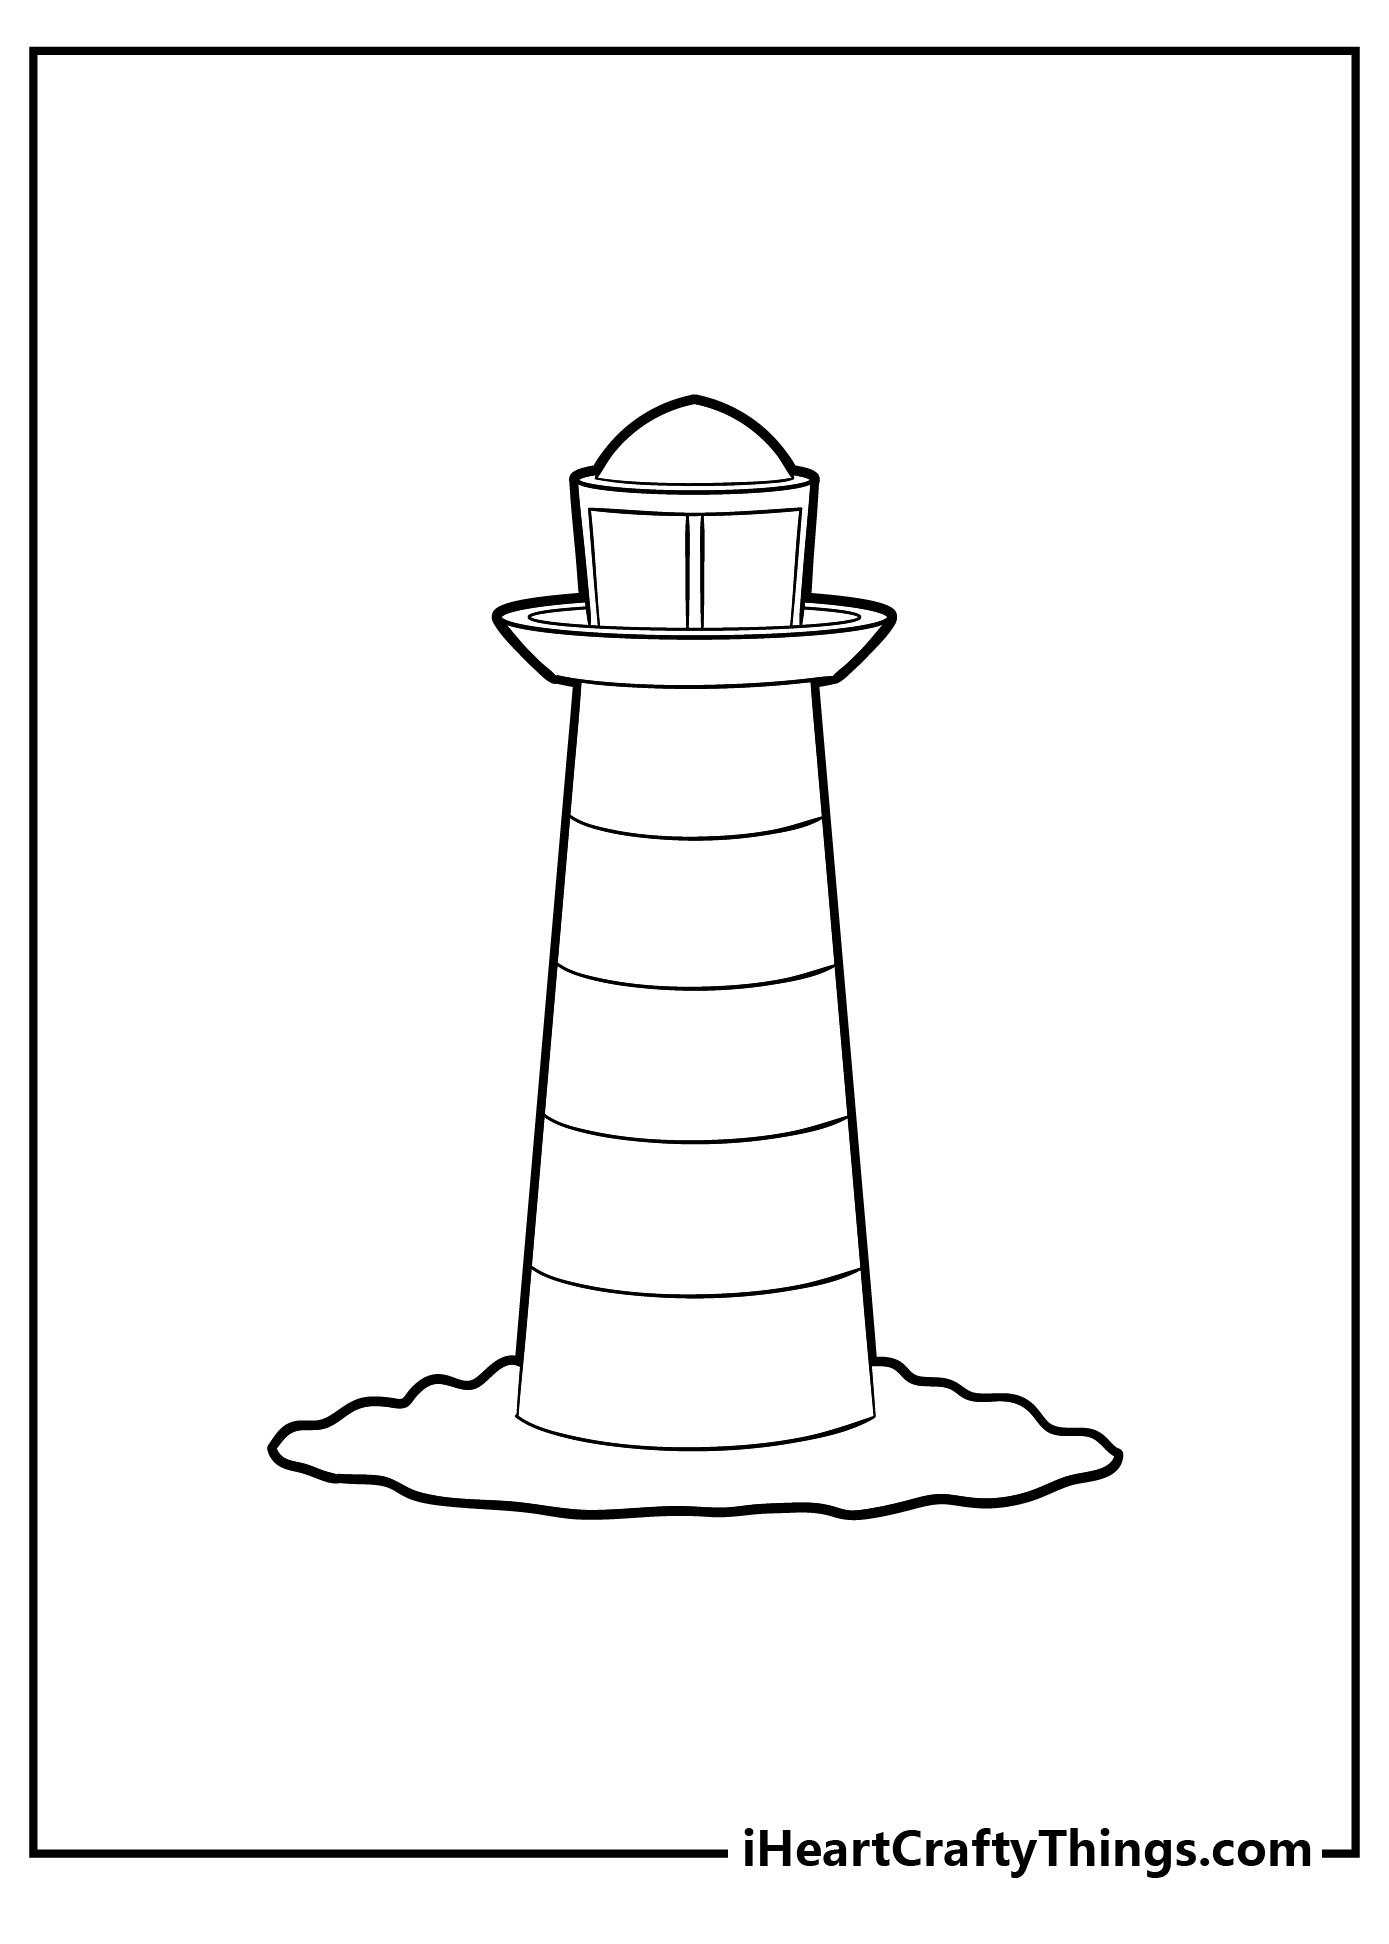 Lighthouse Coloring Pages for adults free printable